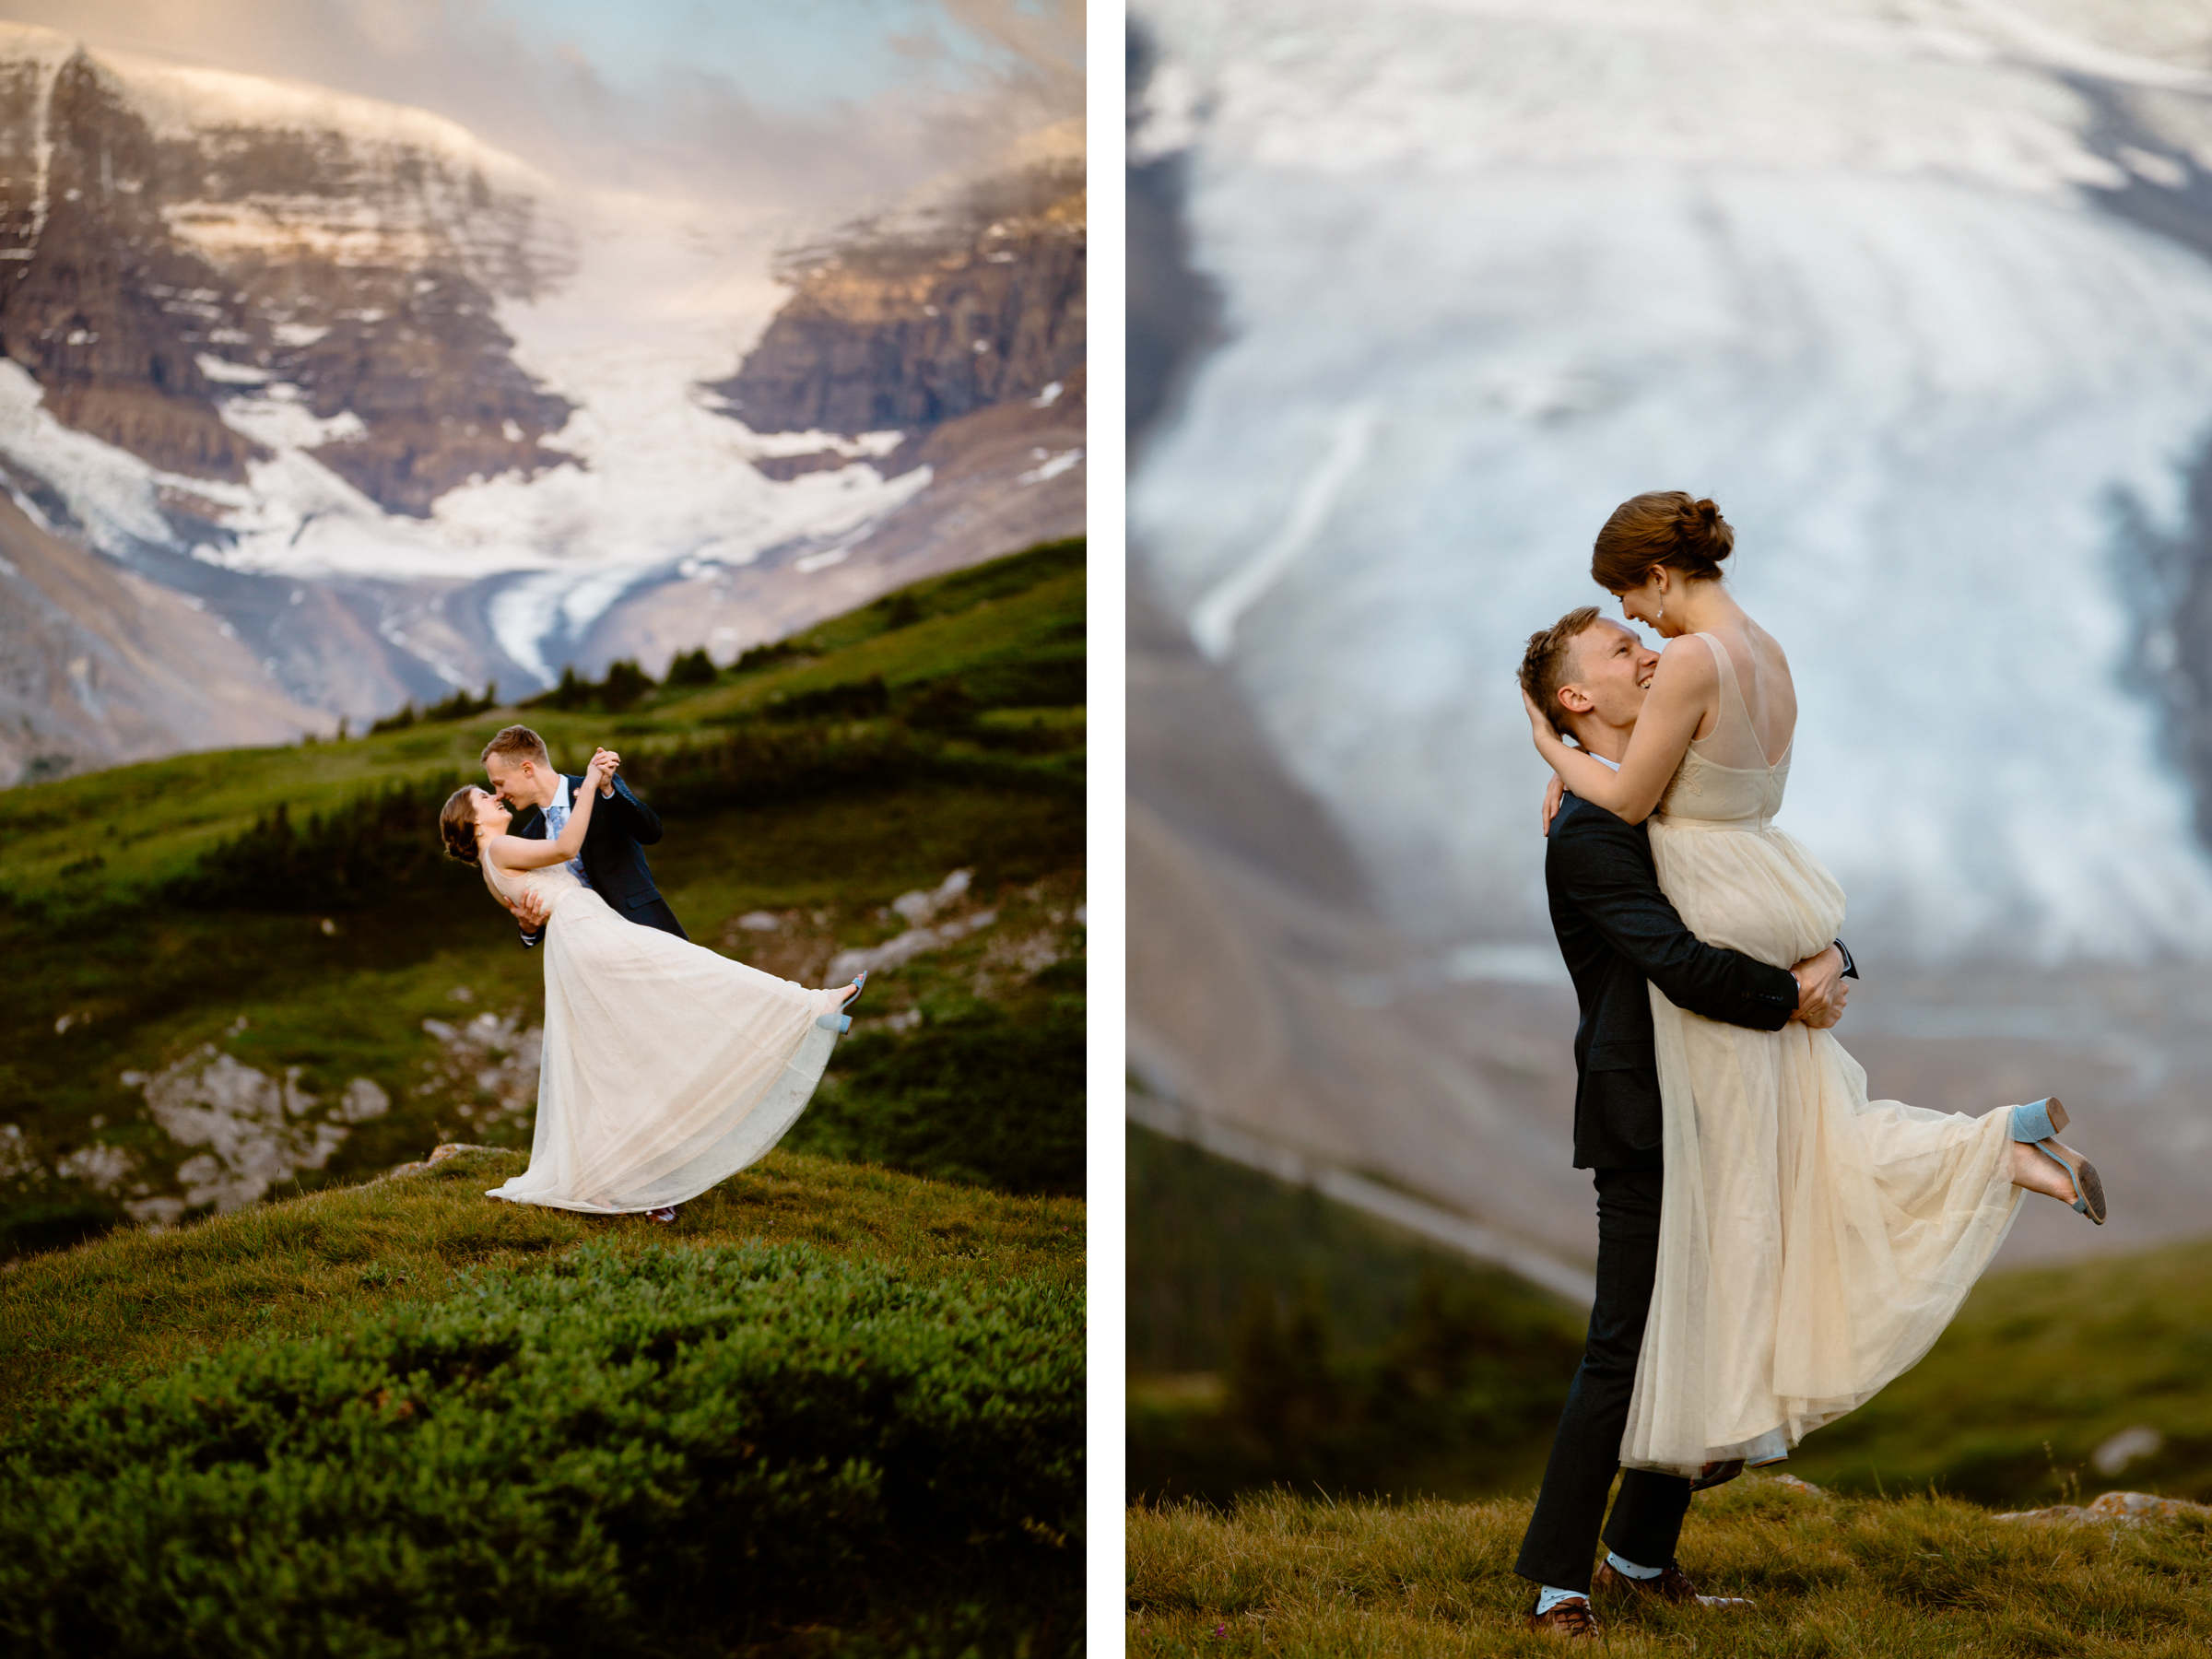 Hiking Elopement Photographers in Banff National Park - Photo 25